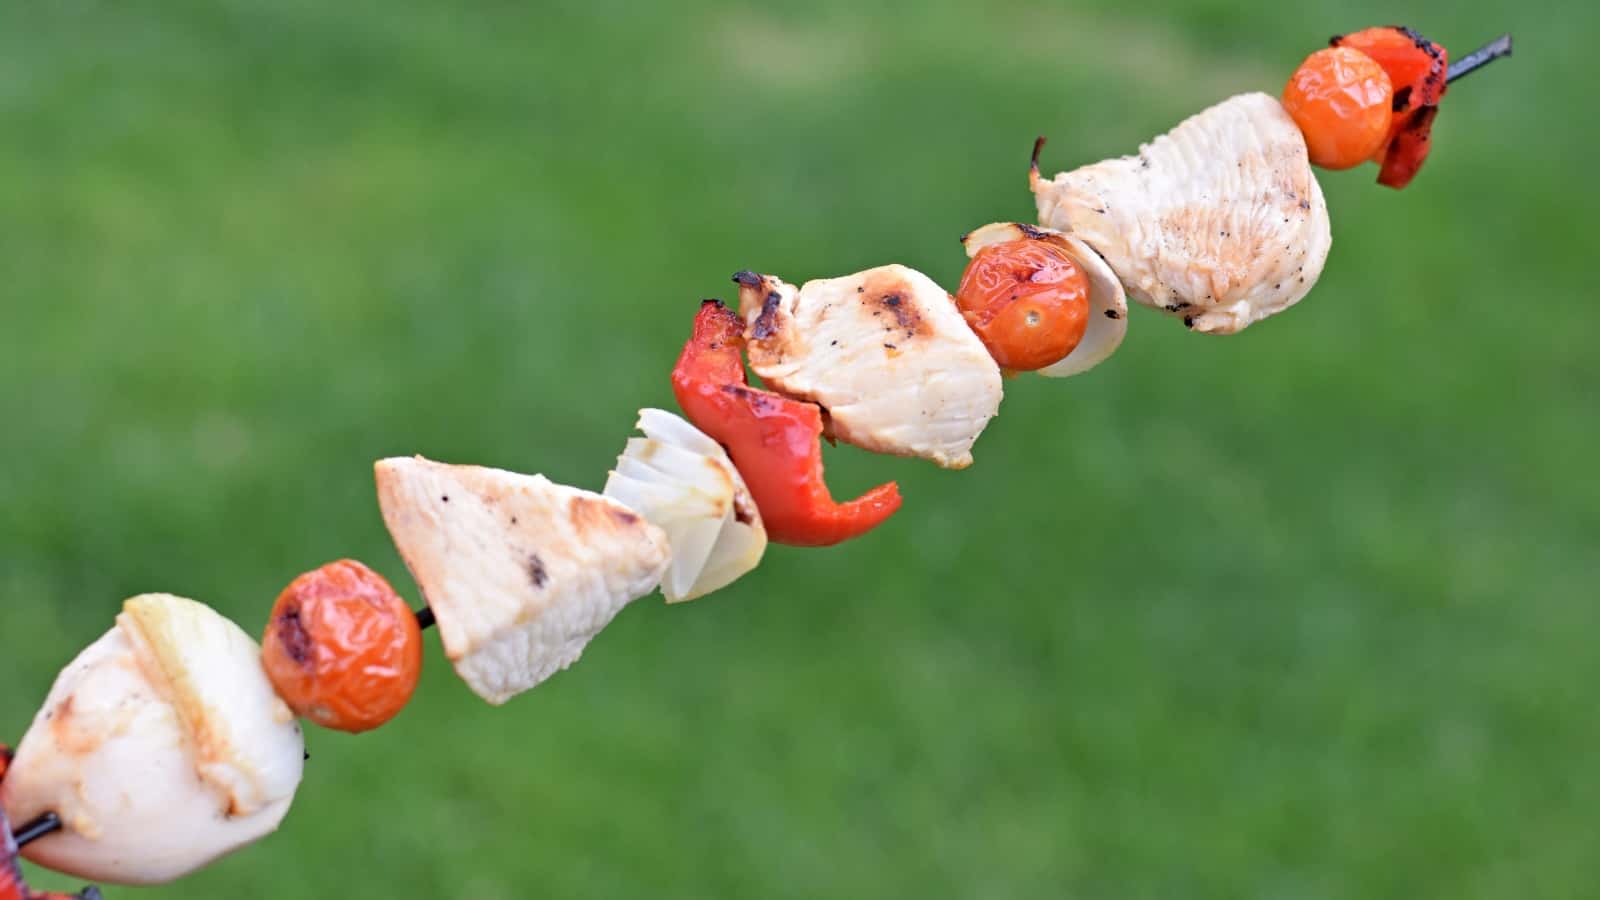 Lemon marinated chicken kebabs on a skewer with green background.